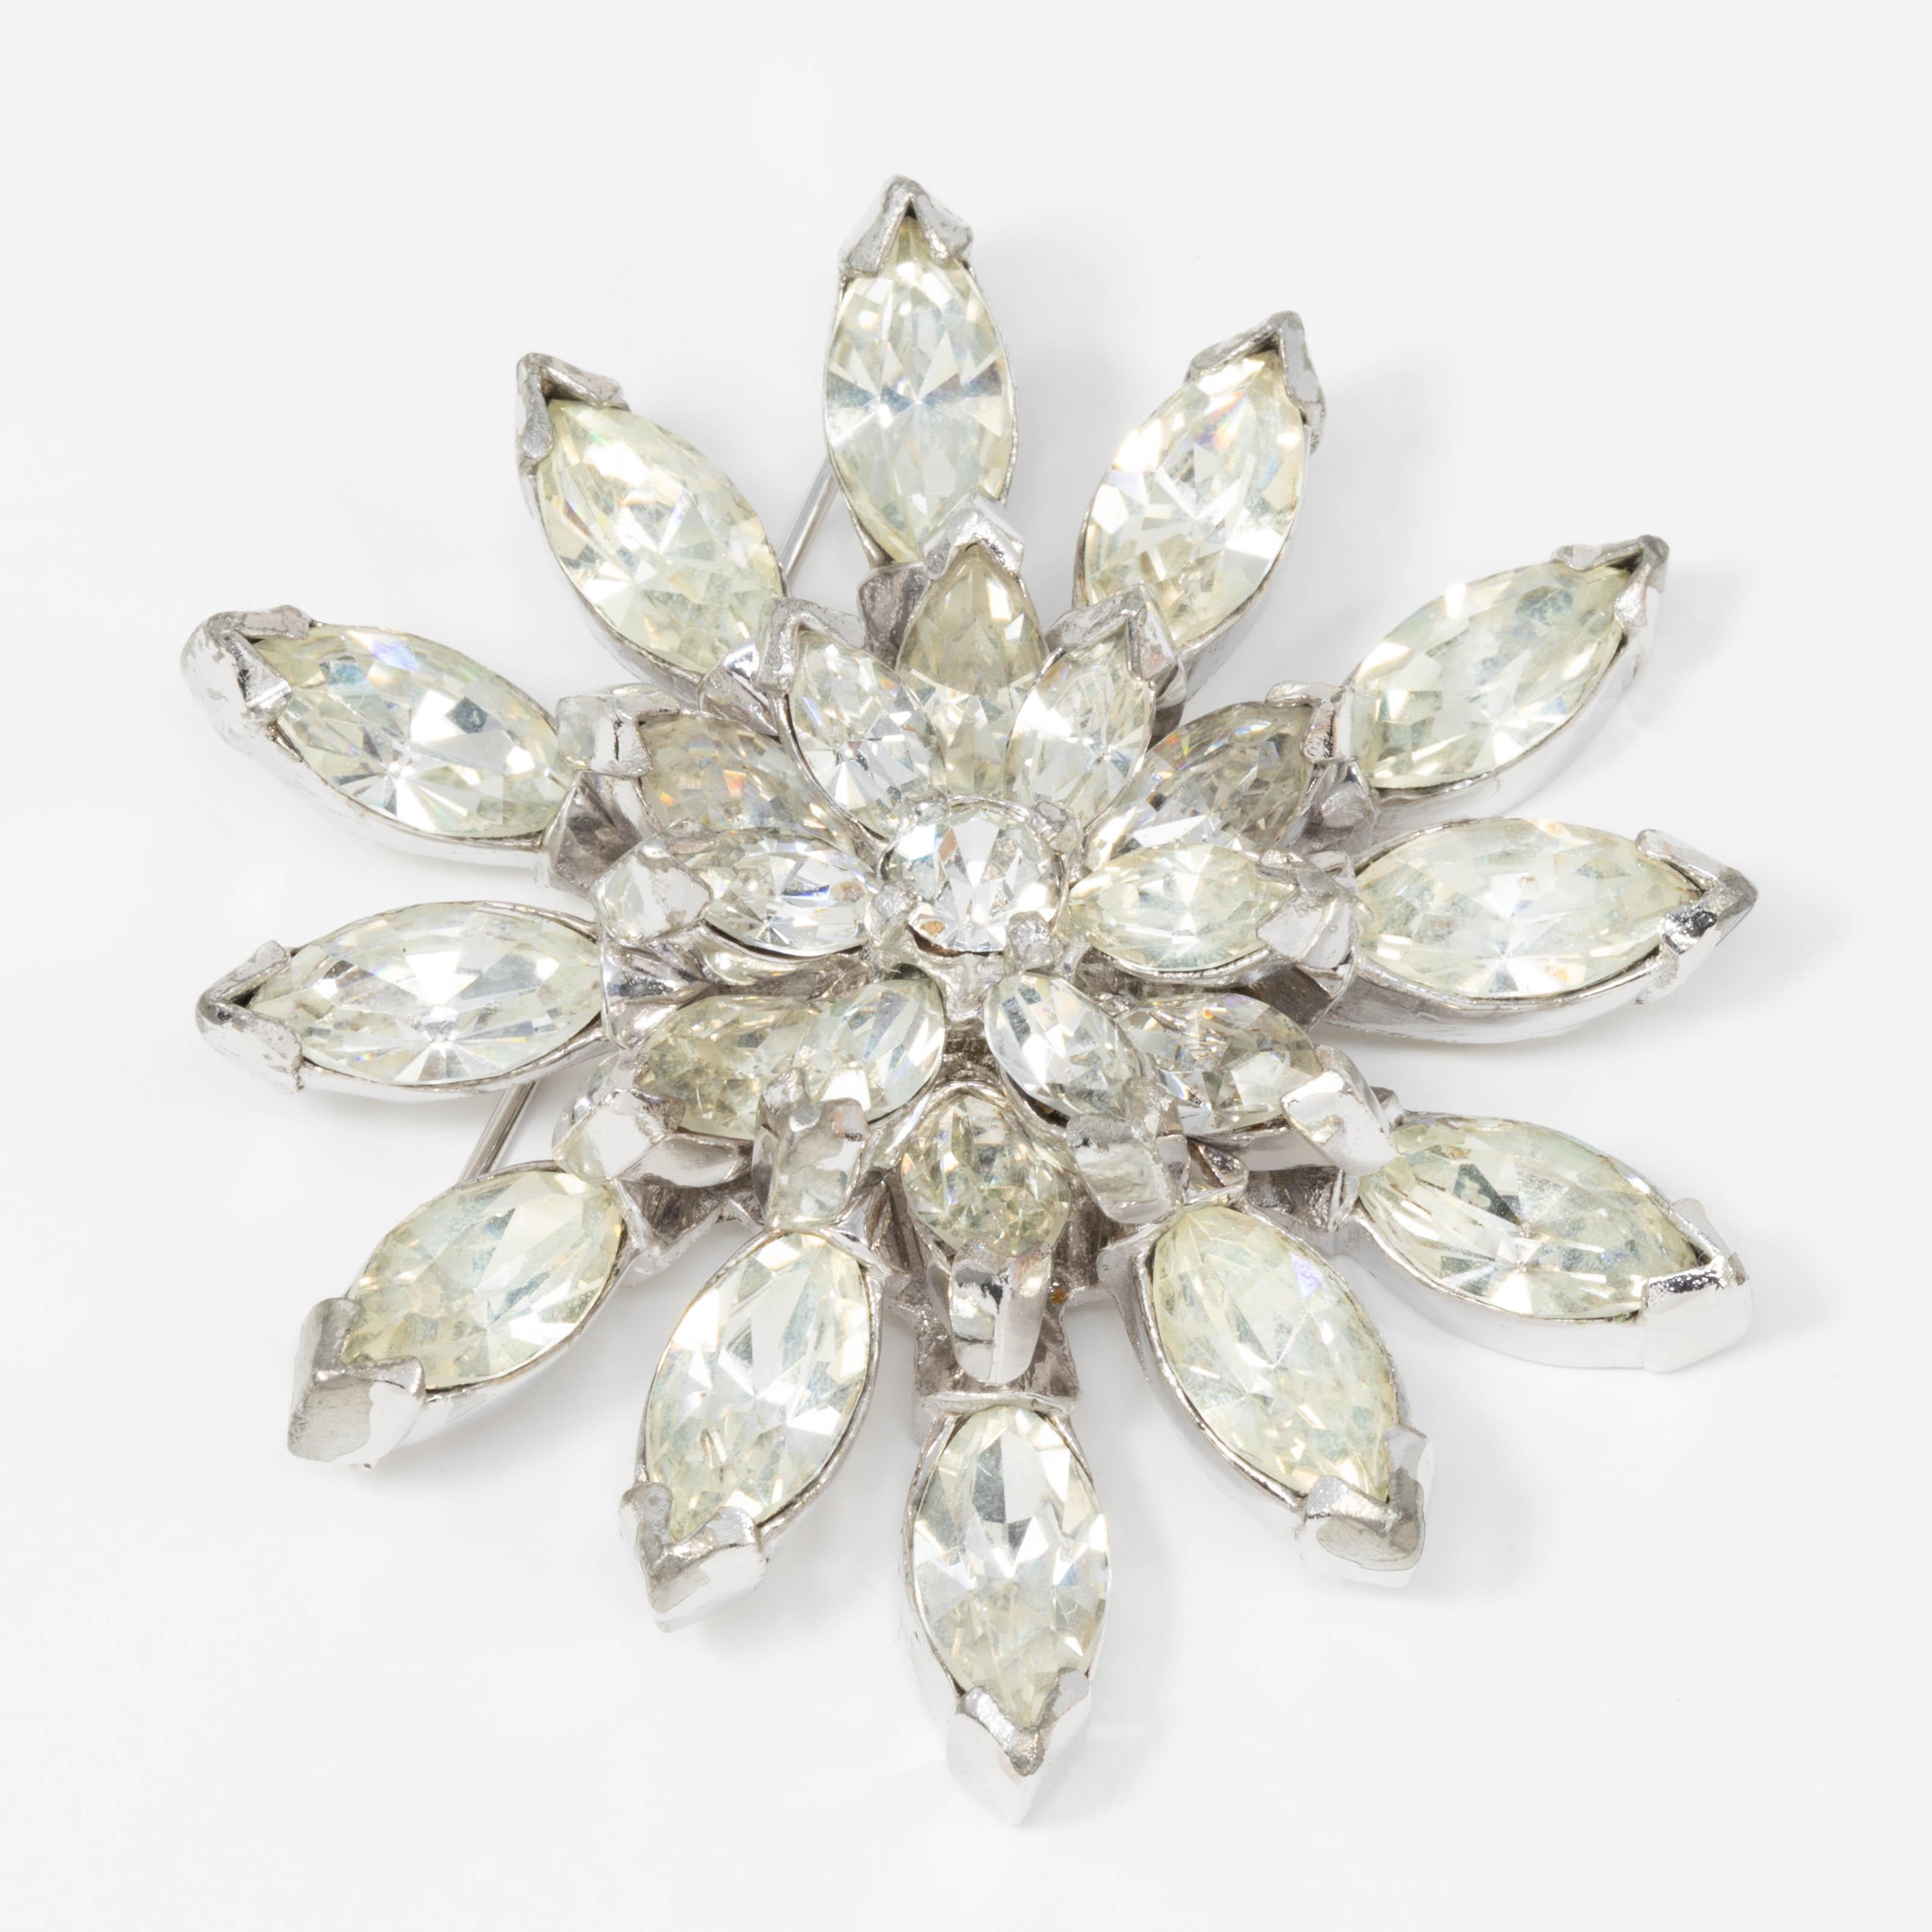 A sparkling pointed petal flower pin brooch from the 1940s Eisenberg Original collection. This glittering accessory features prong-set clear crystals on a silvertone setting, fastened with a pin clasp.

Tags, Marks, Hallmarks: Eisenberg Original